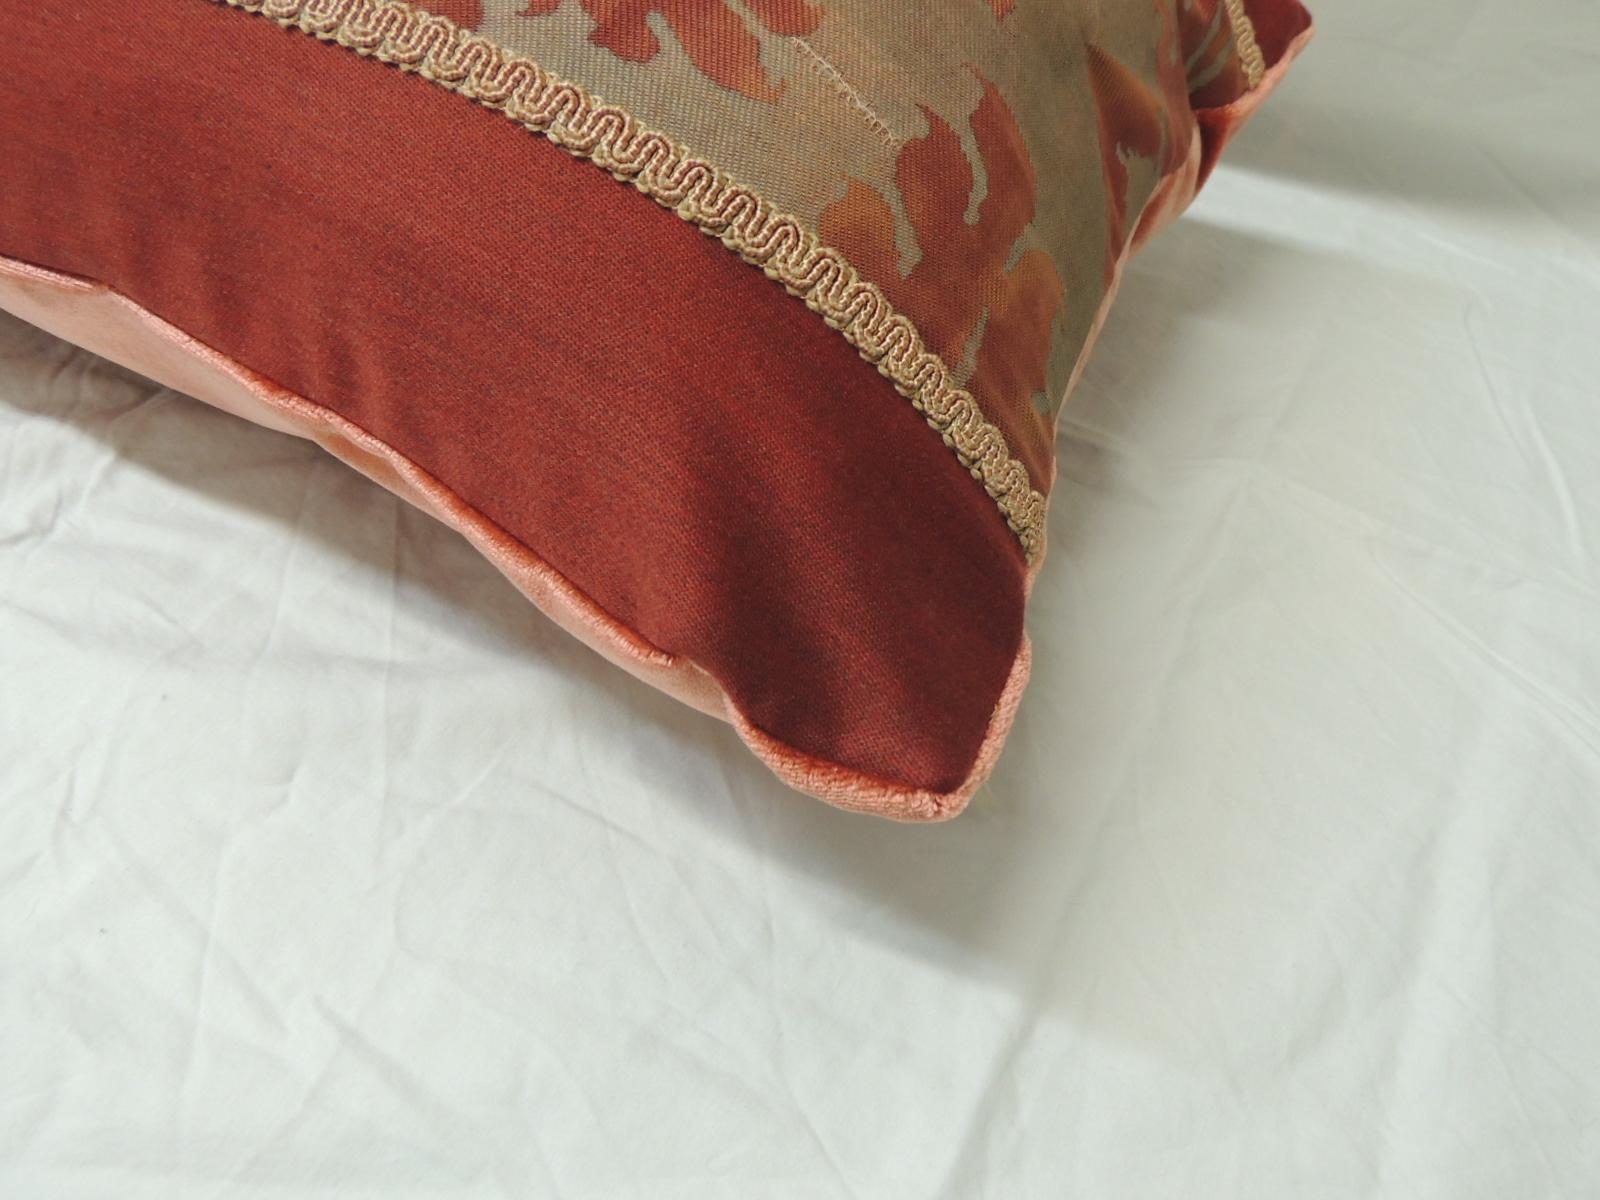 Regency Vintage Fortuny “Glicine” Pattern Red and Silvery Decorative Bolster Pillow